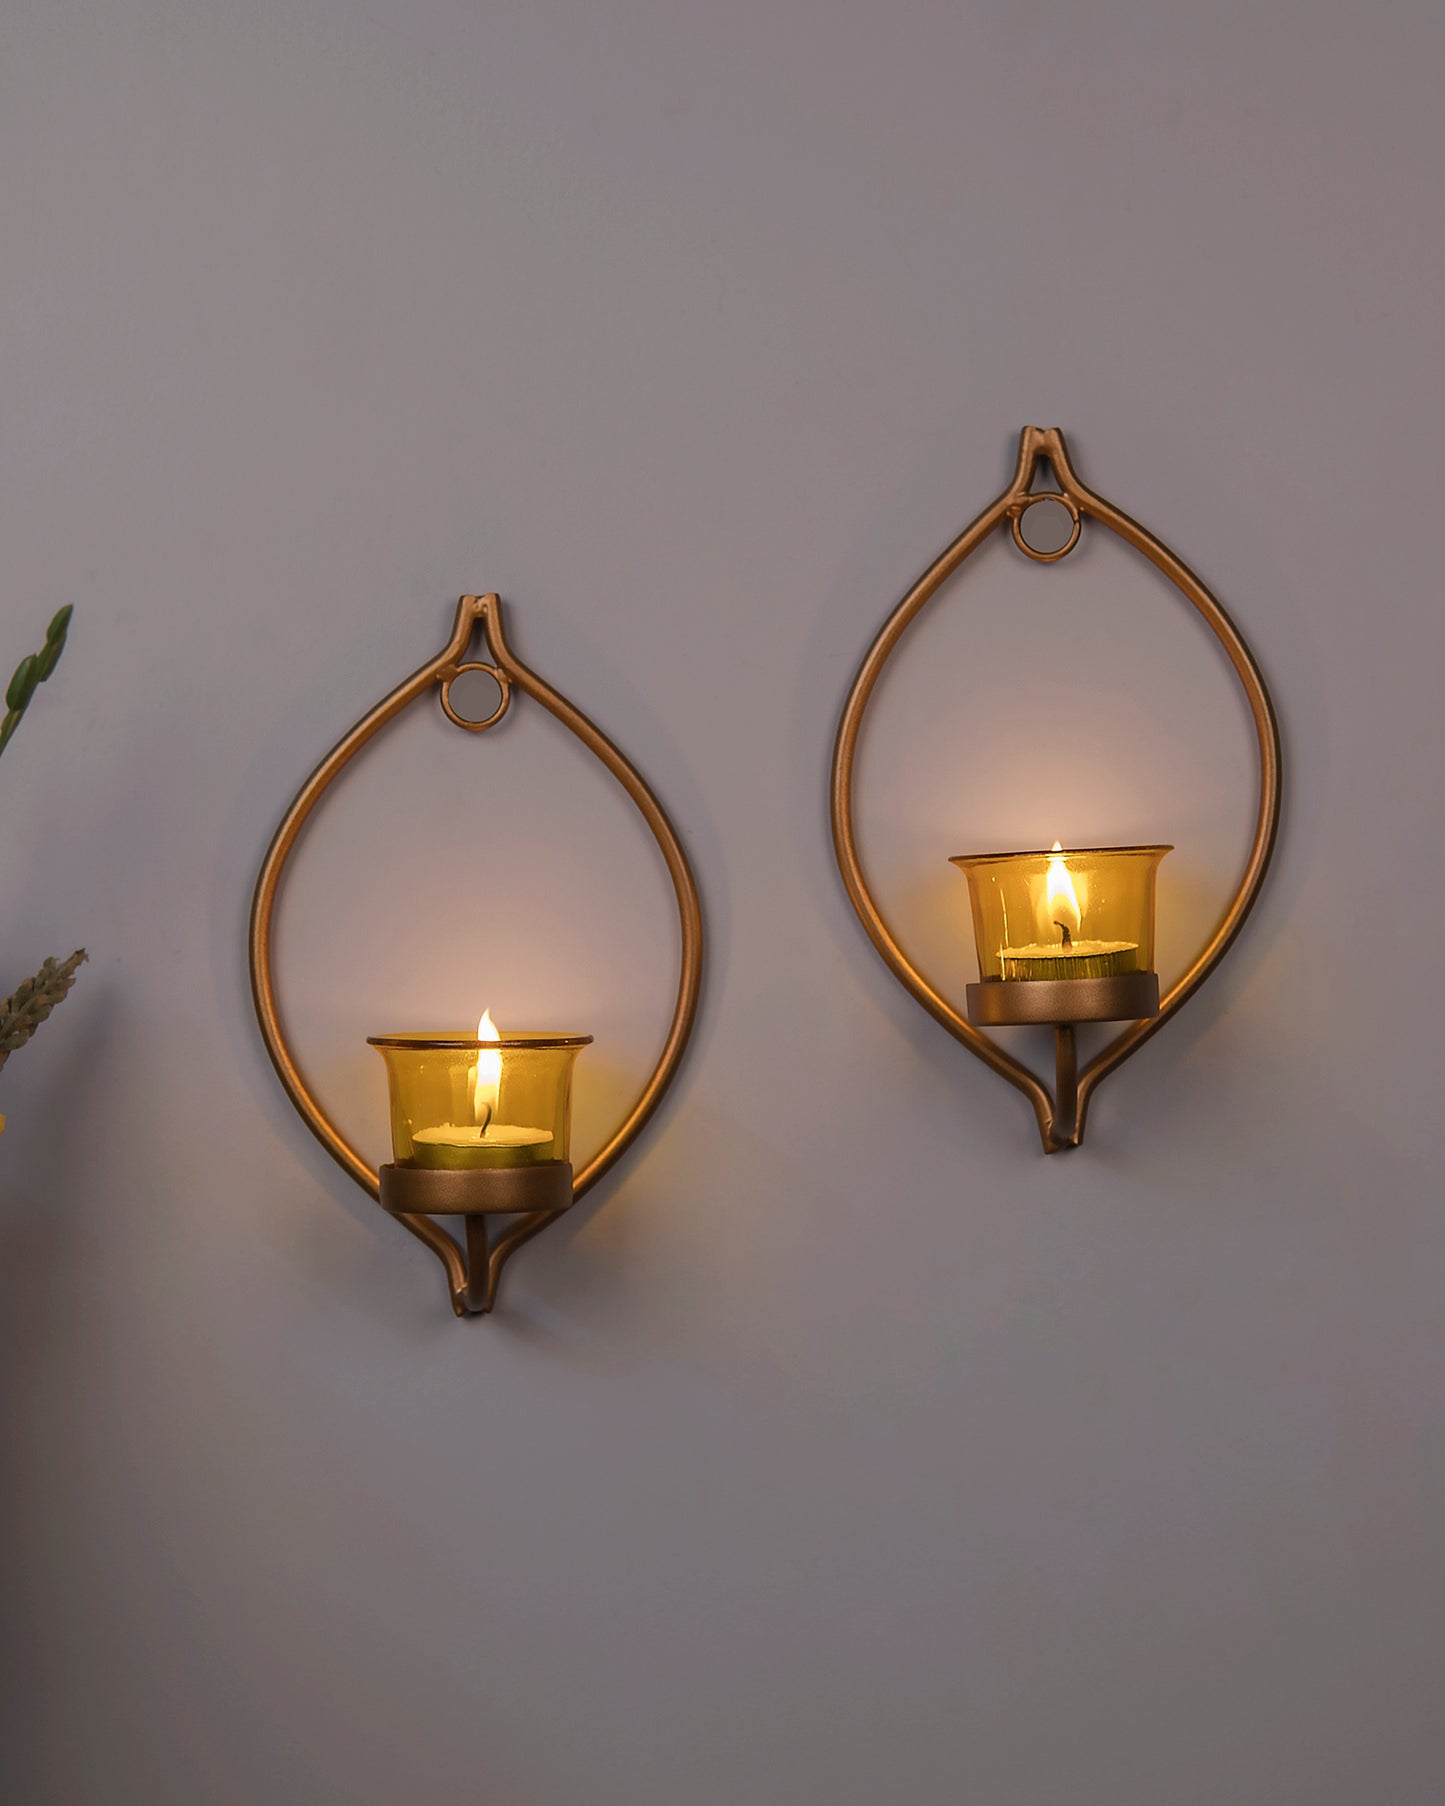 Set of 2 Decorative Golden Eye Wall Sconce/Candle Holder With Glass and Free T-light Candles